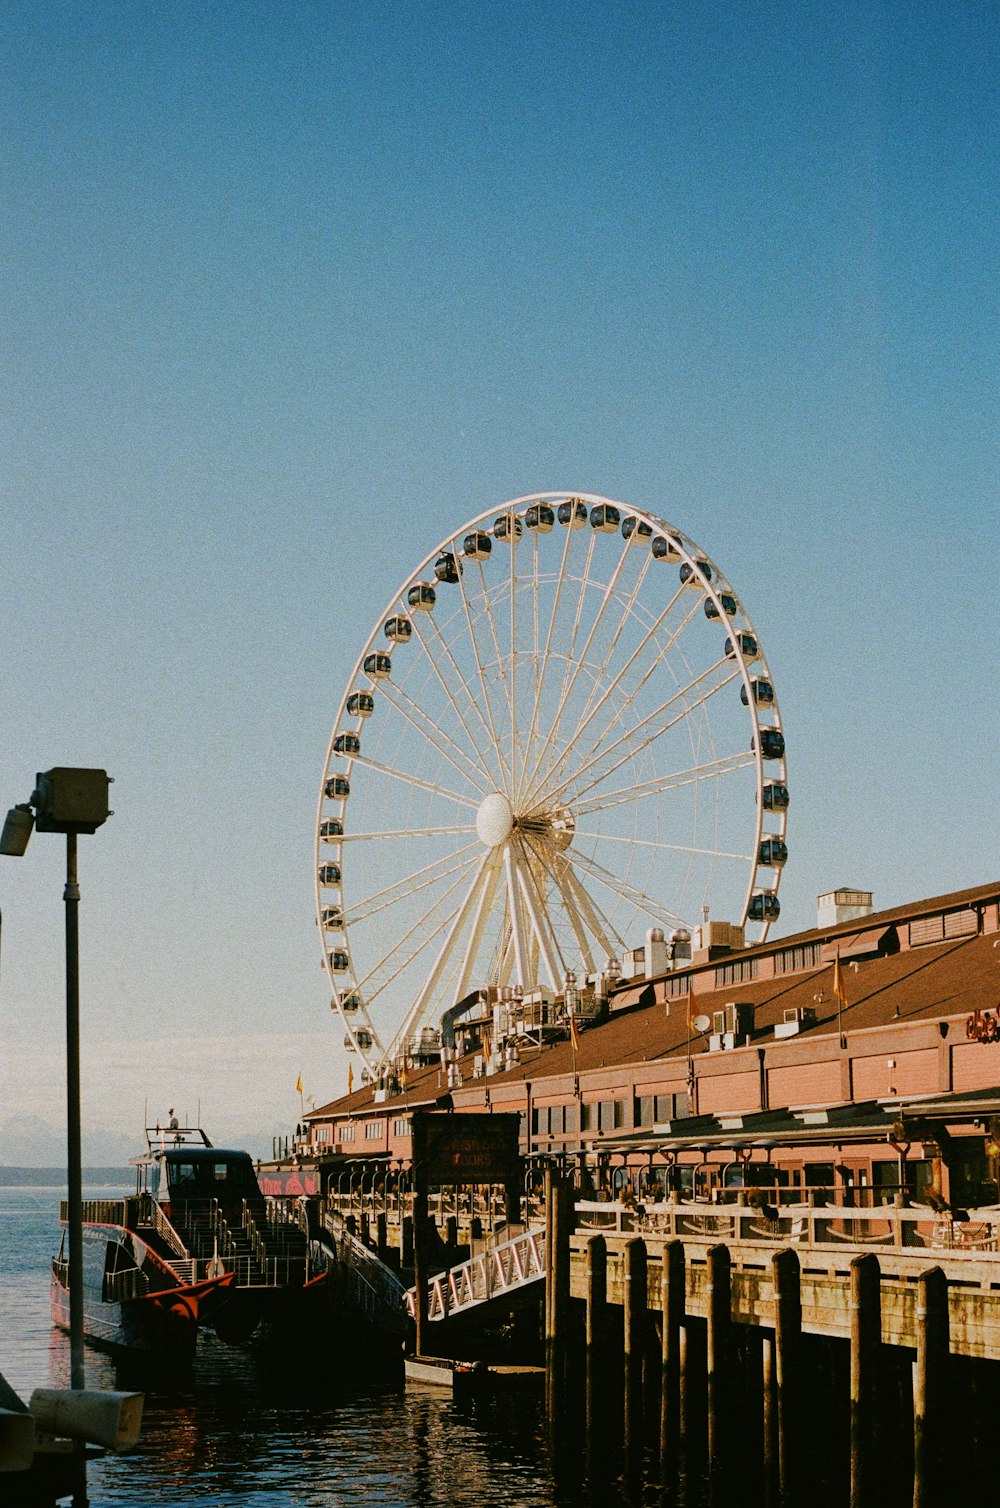 a large ferris wheel sitting next to a pier